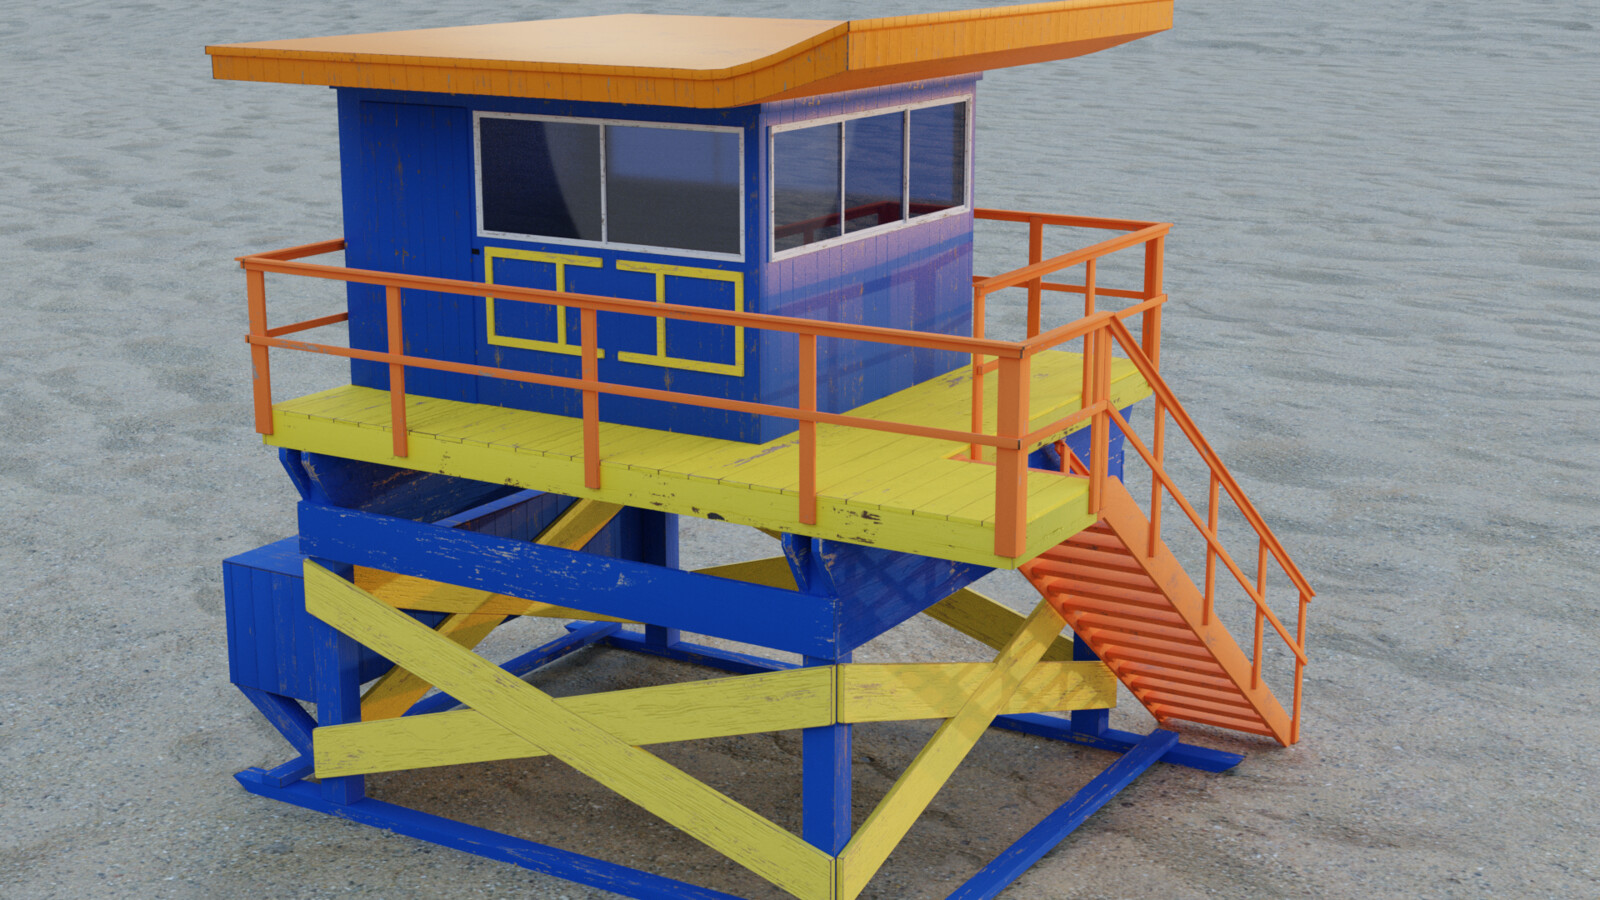 Image referring to a lifeguard tower.